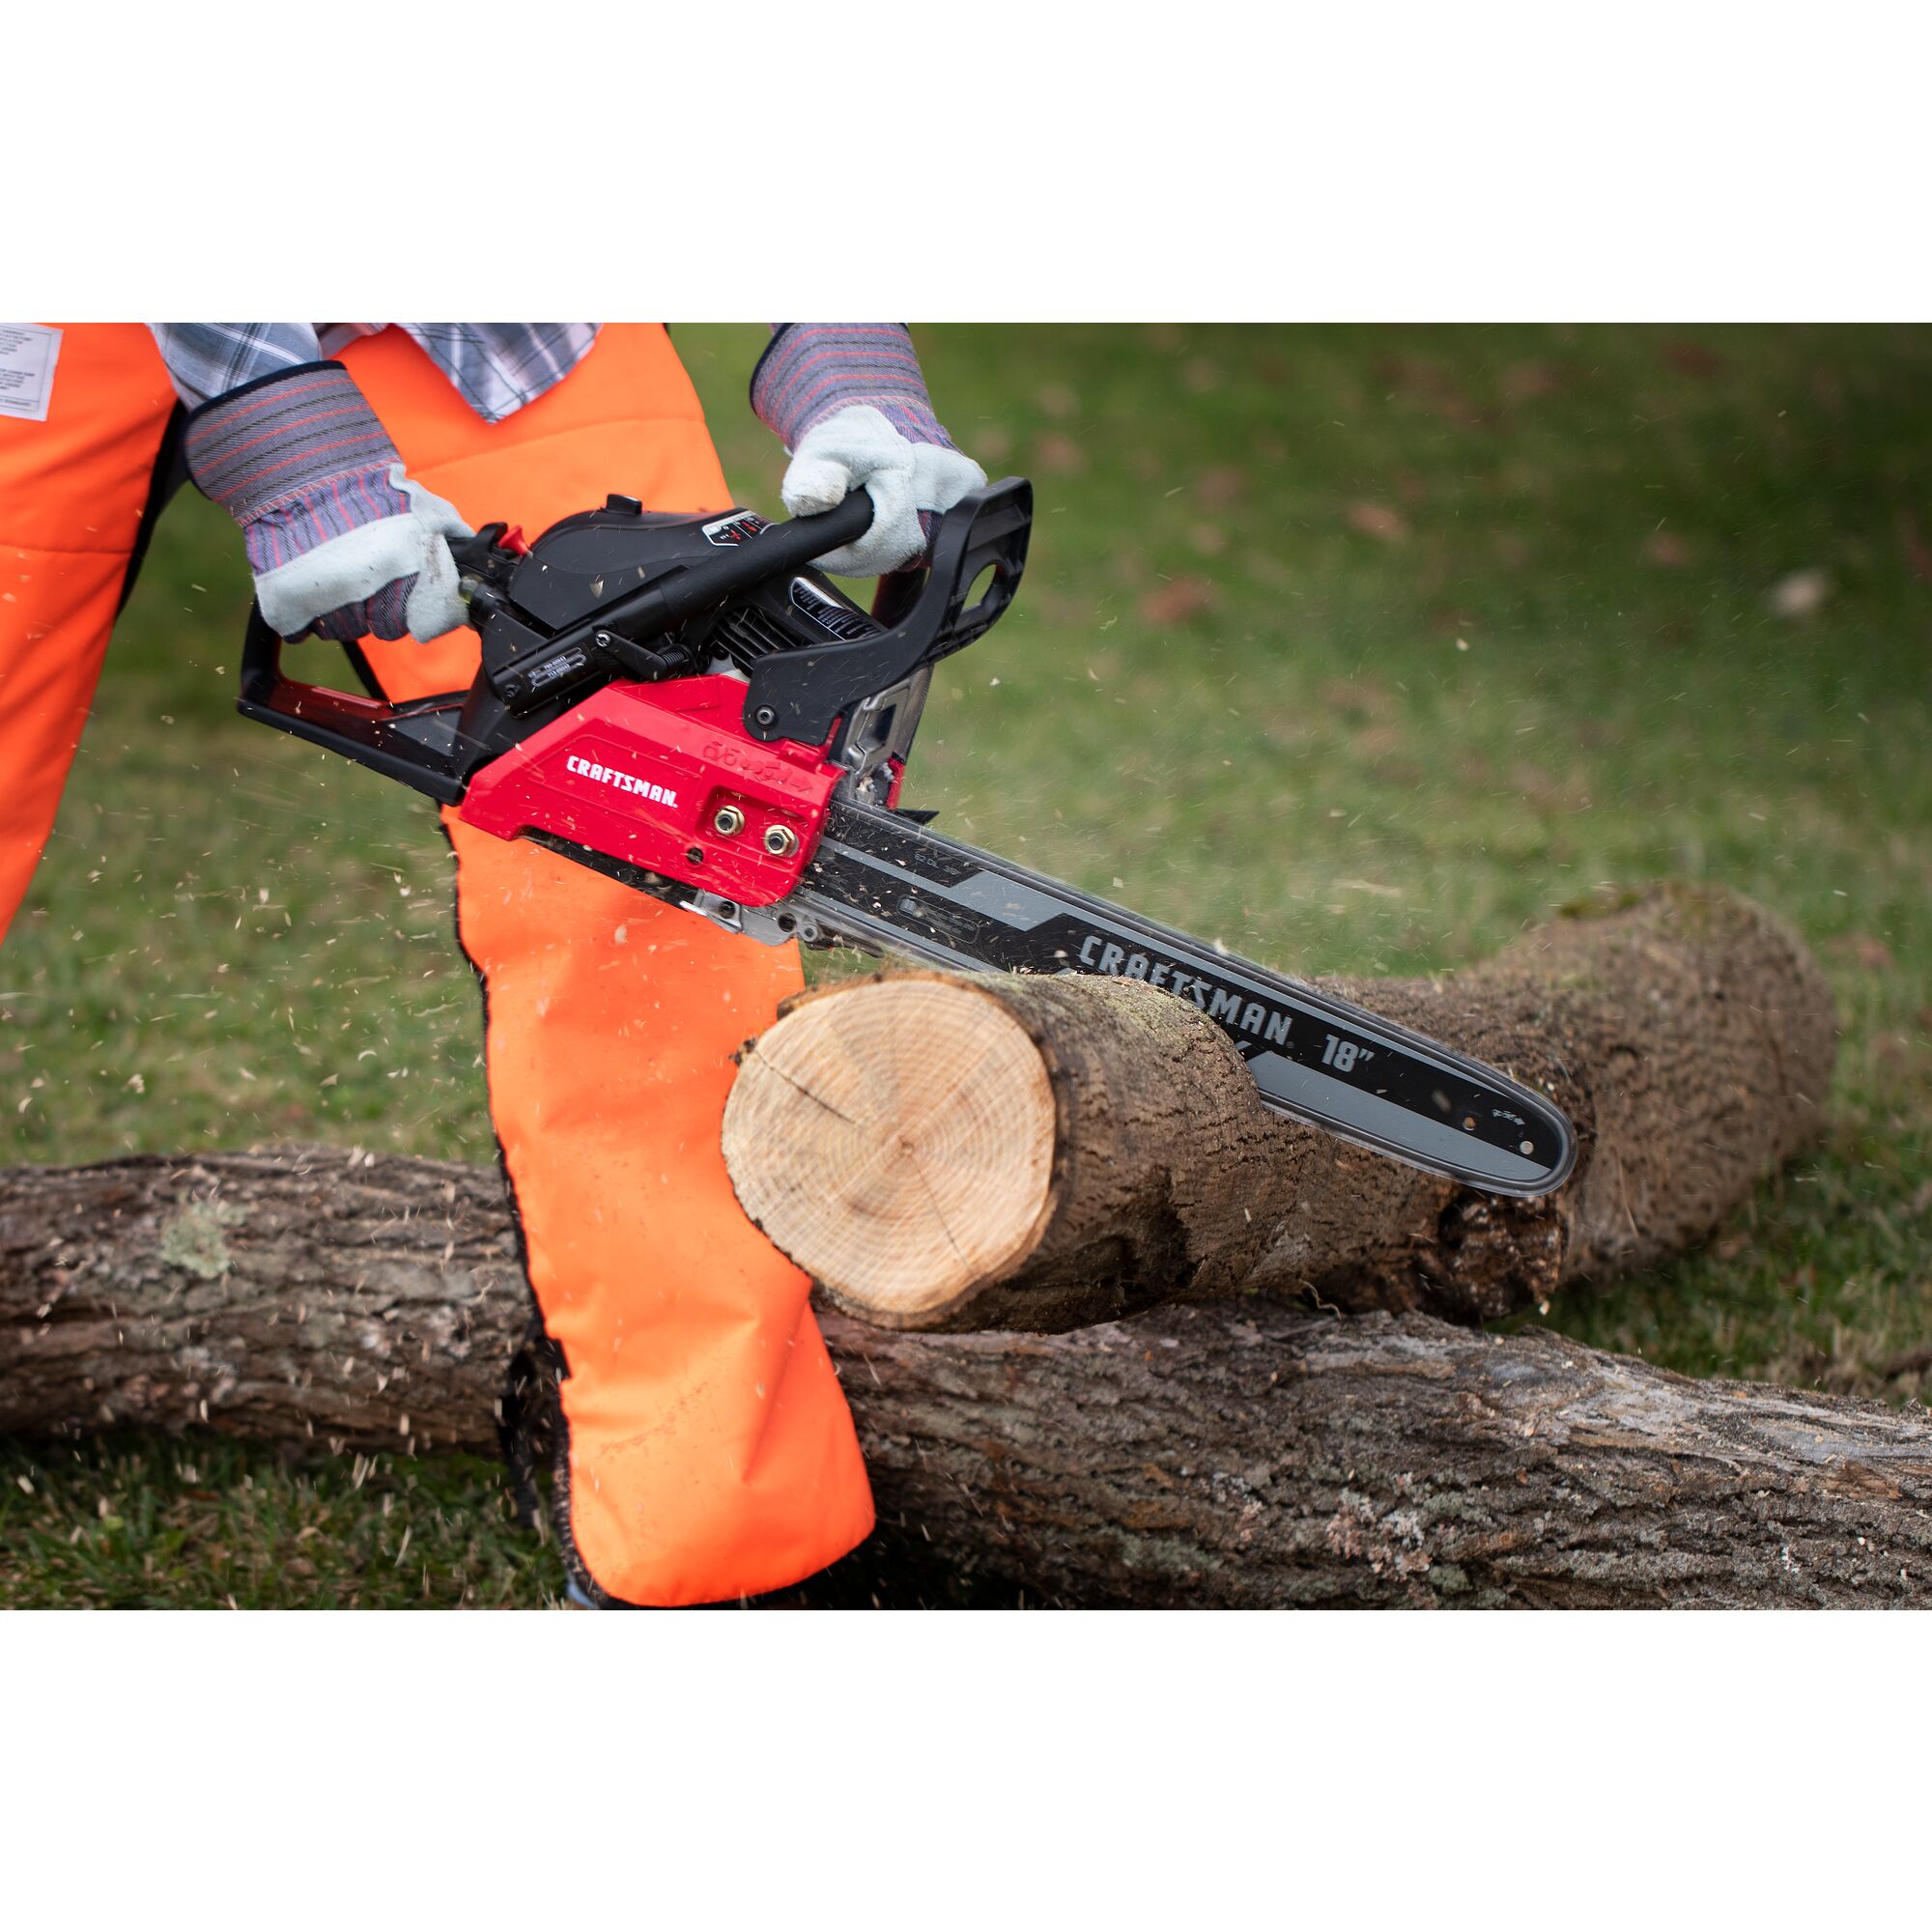 CRAFTSMAN S185 Gas Chainsaw cutting tree branches in yard in side view